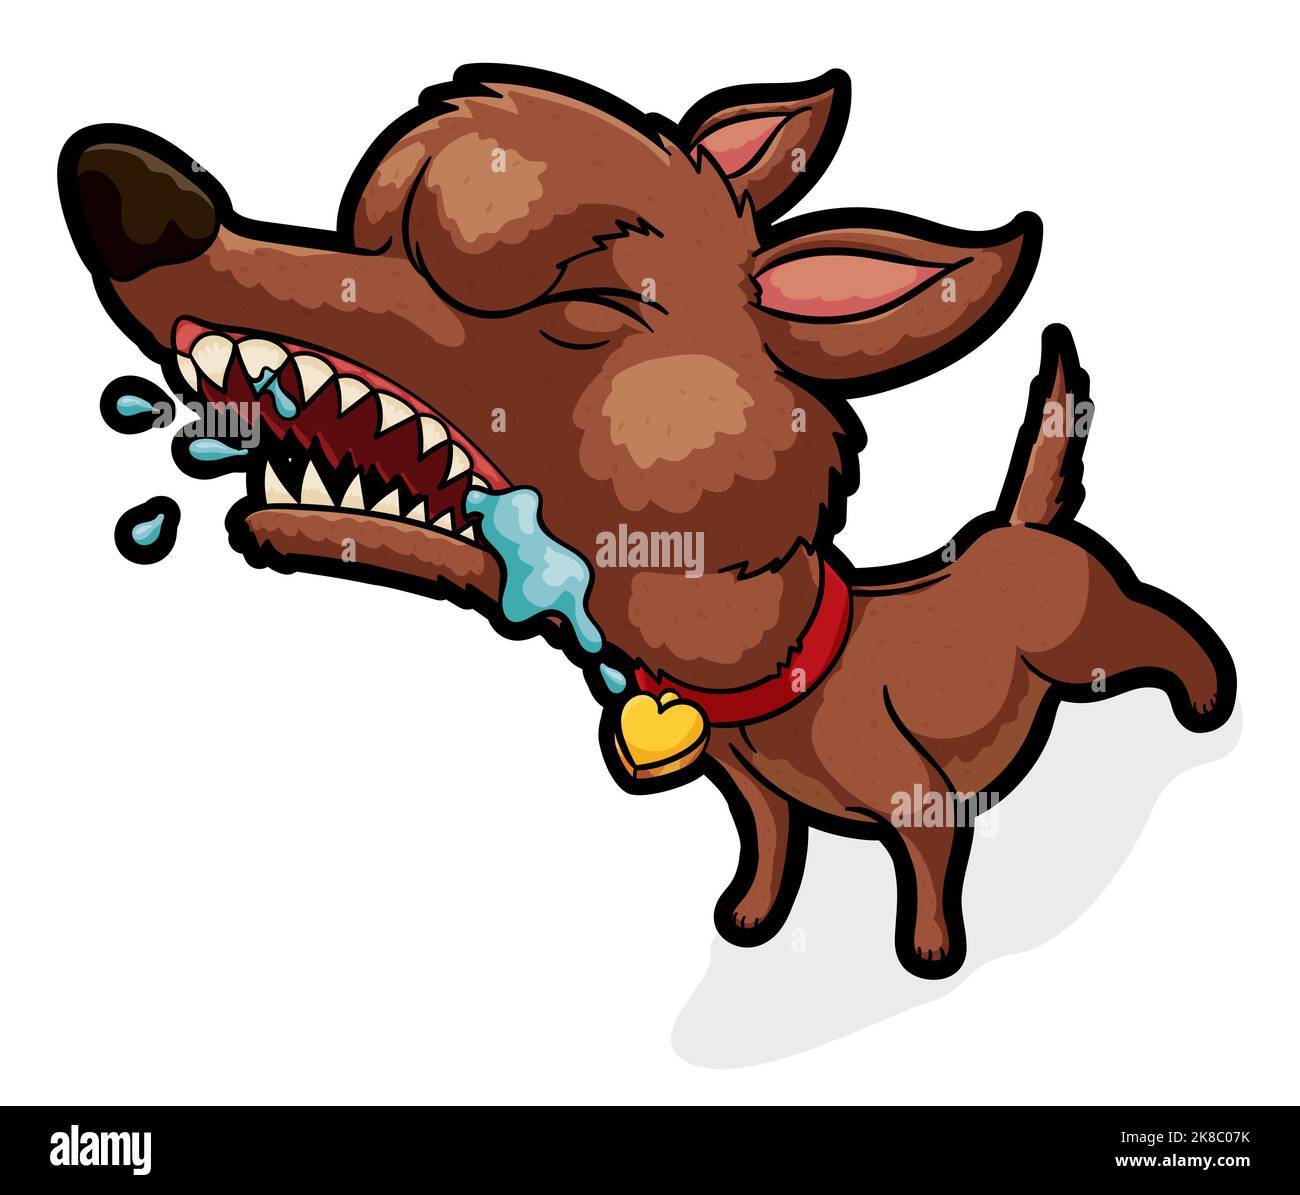 Little mad dog barking with furious gesture and showing its teeth, also wearing a red collar with heart medal. Stock Vector